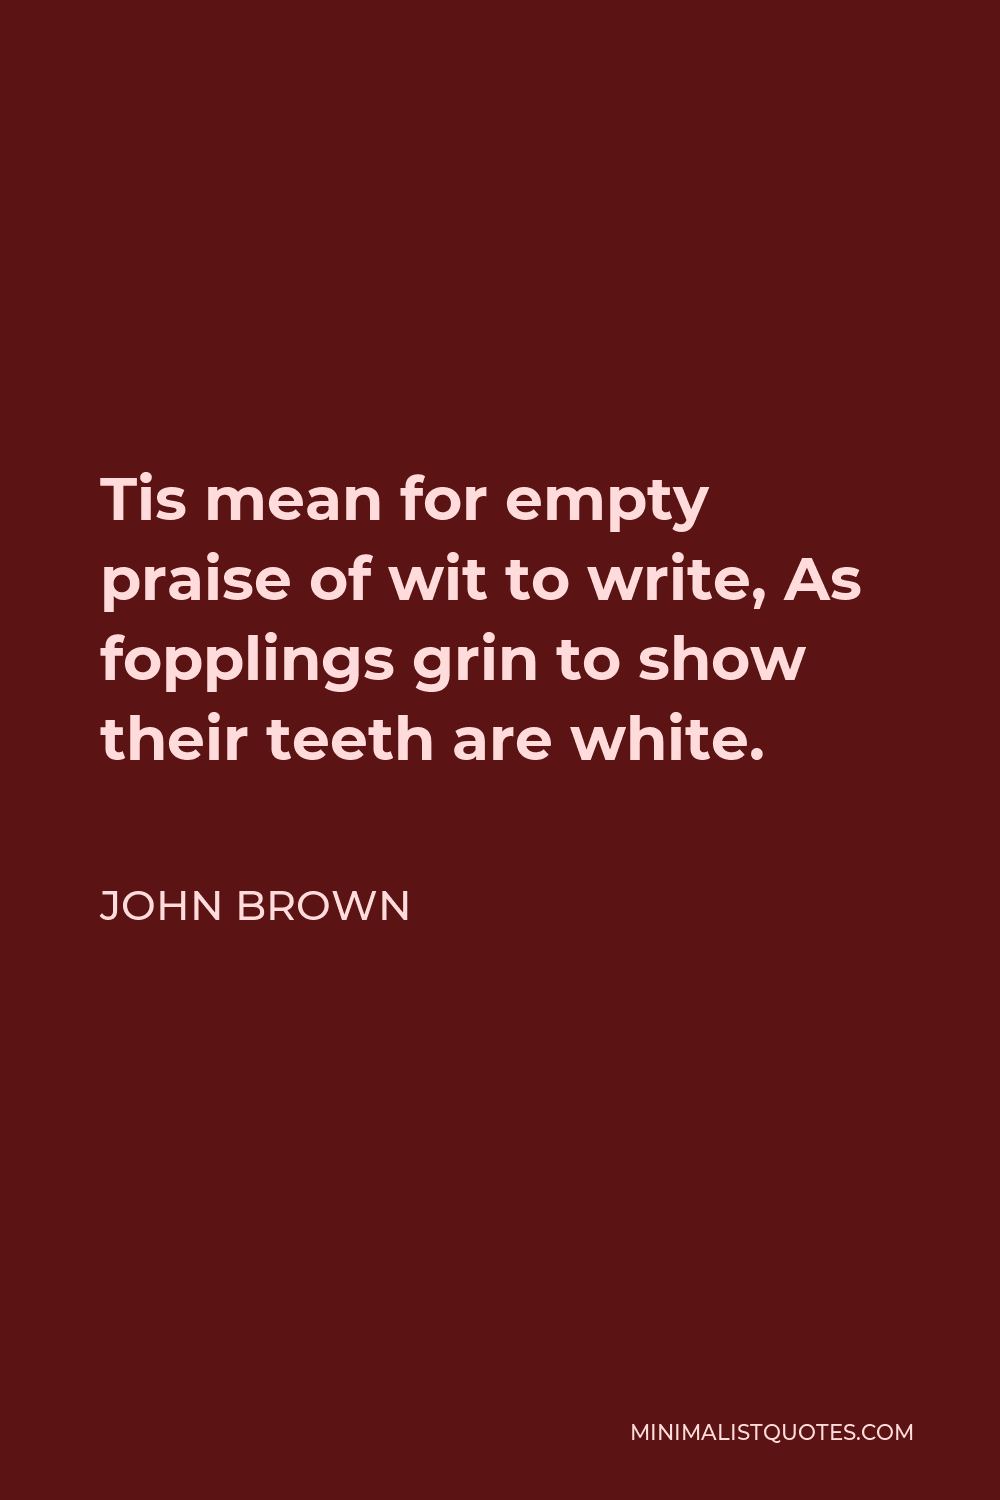 John Brown Quote - Tis mean for empty praise of wit to write, As fopplings grin to show their teeth are white.